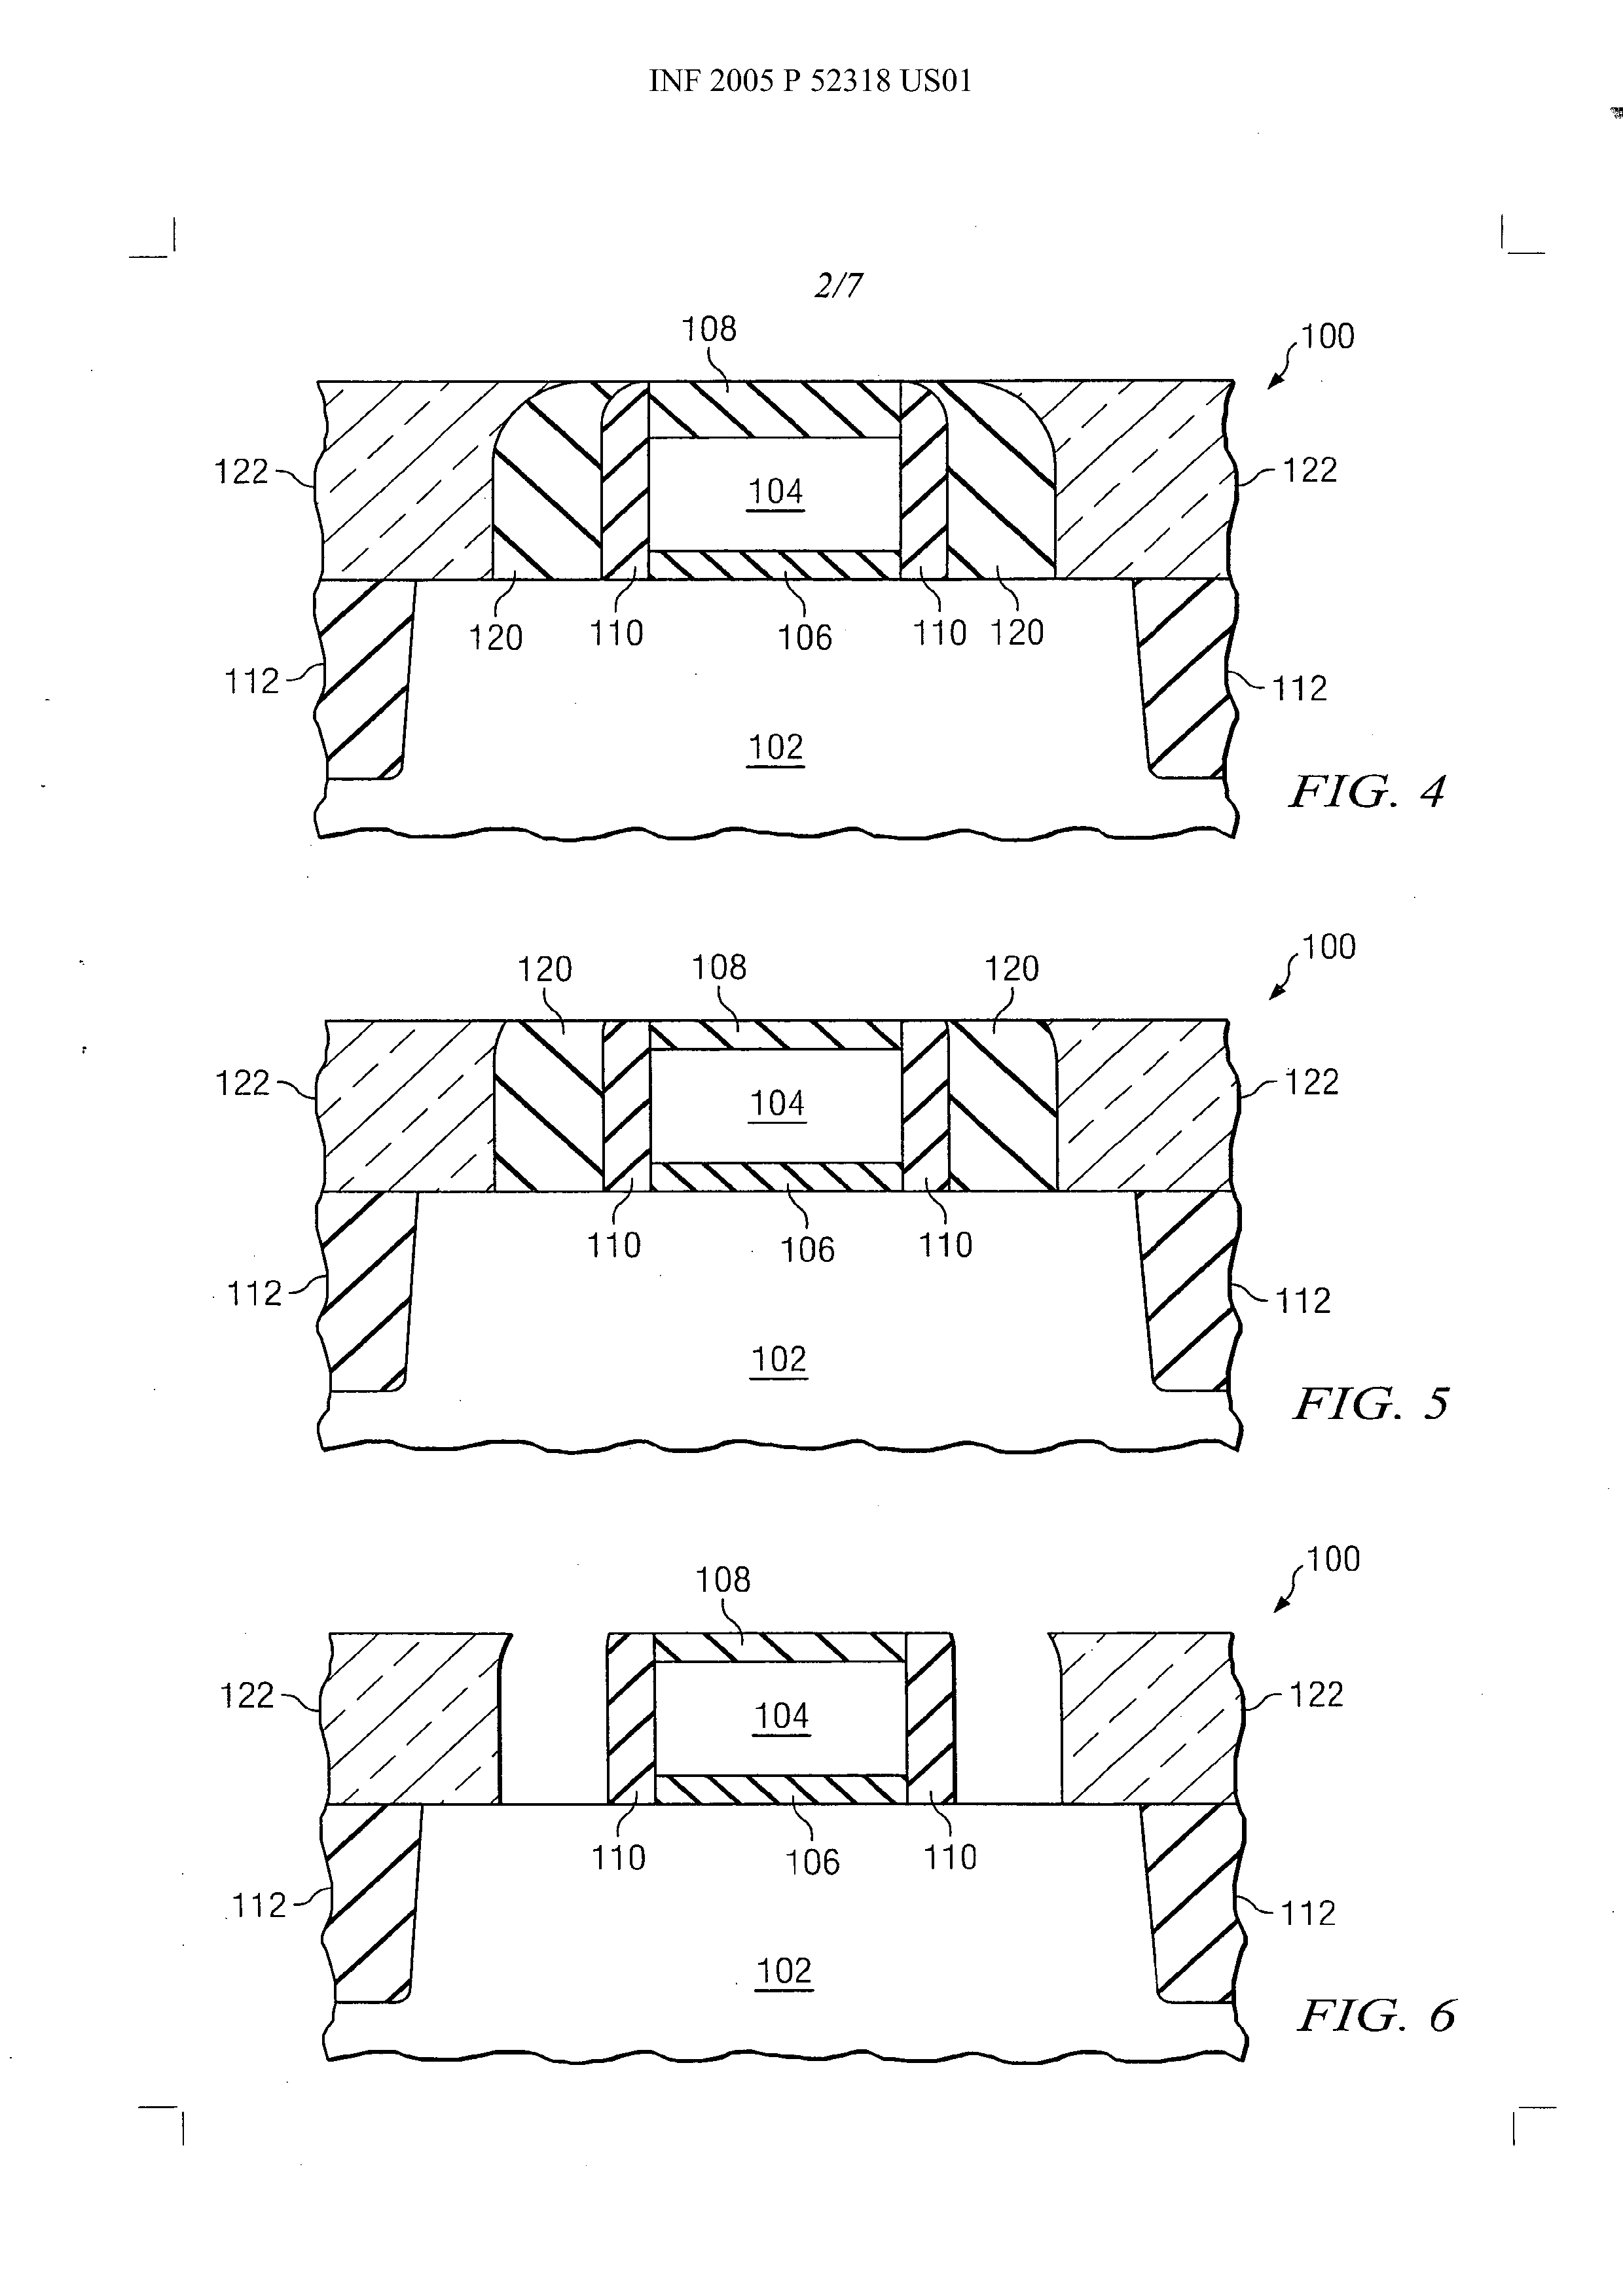 Strained Semiconductor Device and Method of Making the Same